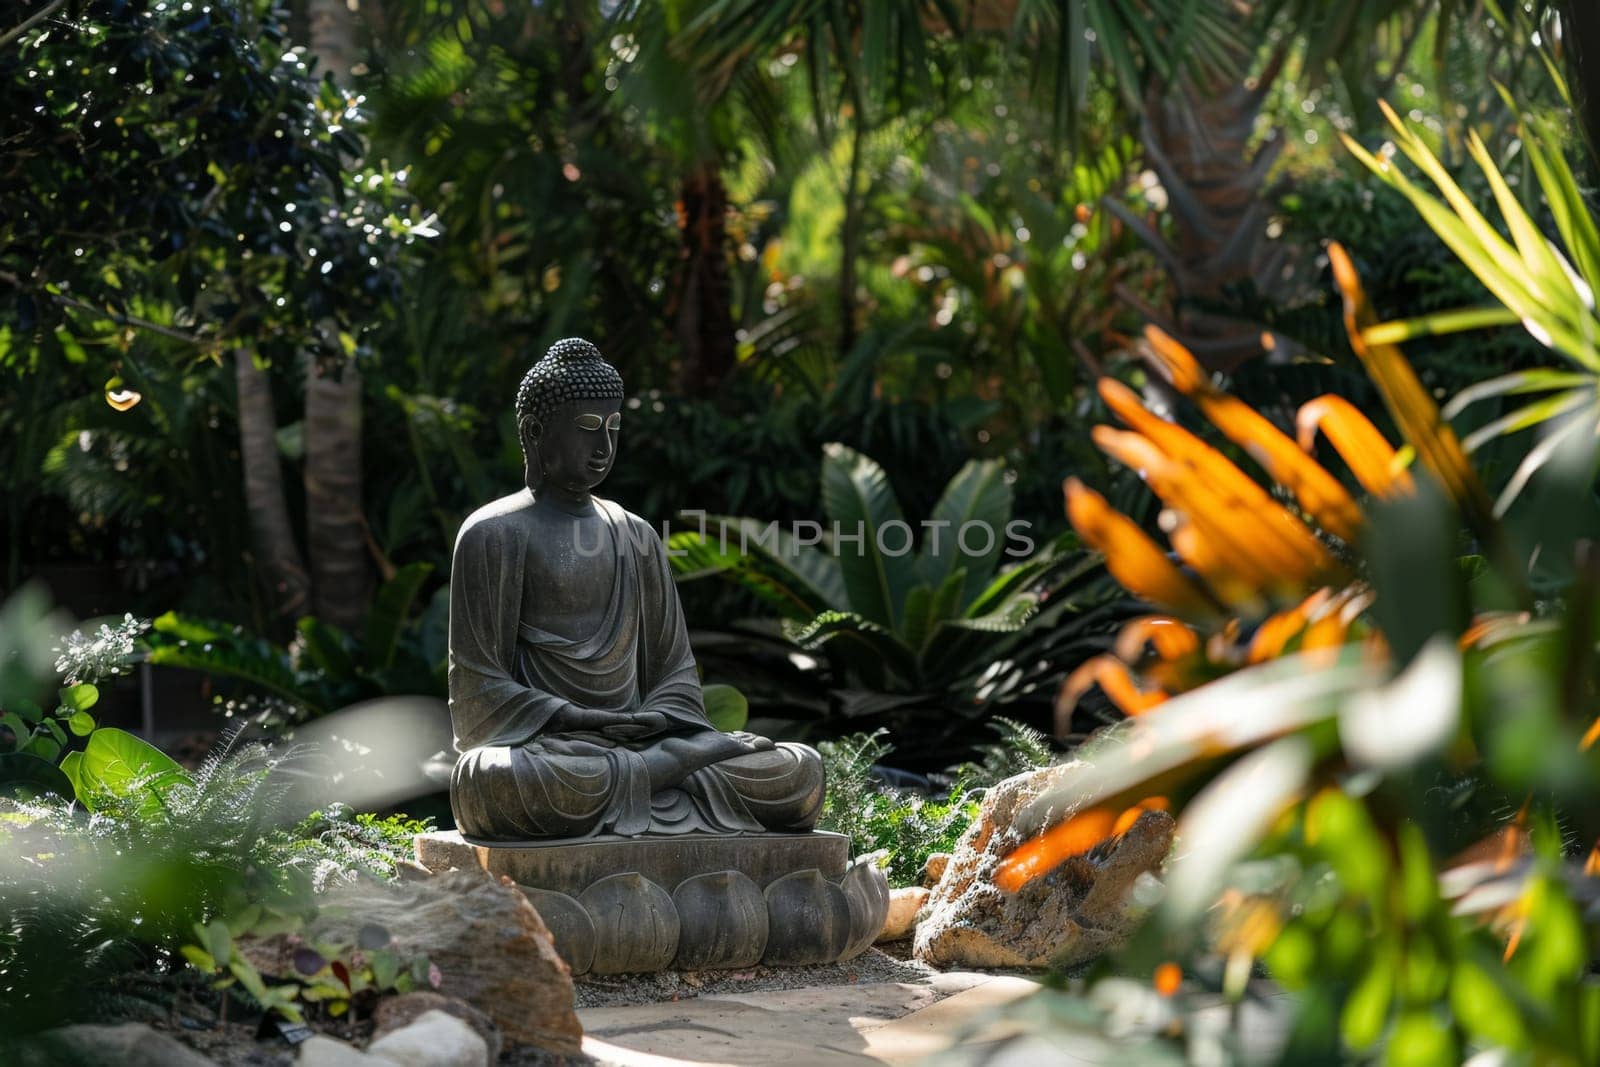 A tranquil Buddha statue sits in a meditative pose amidst a Zen garden, bathed in the golden light of sunset